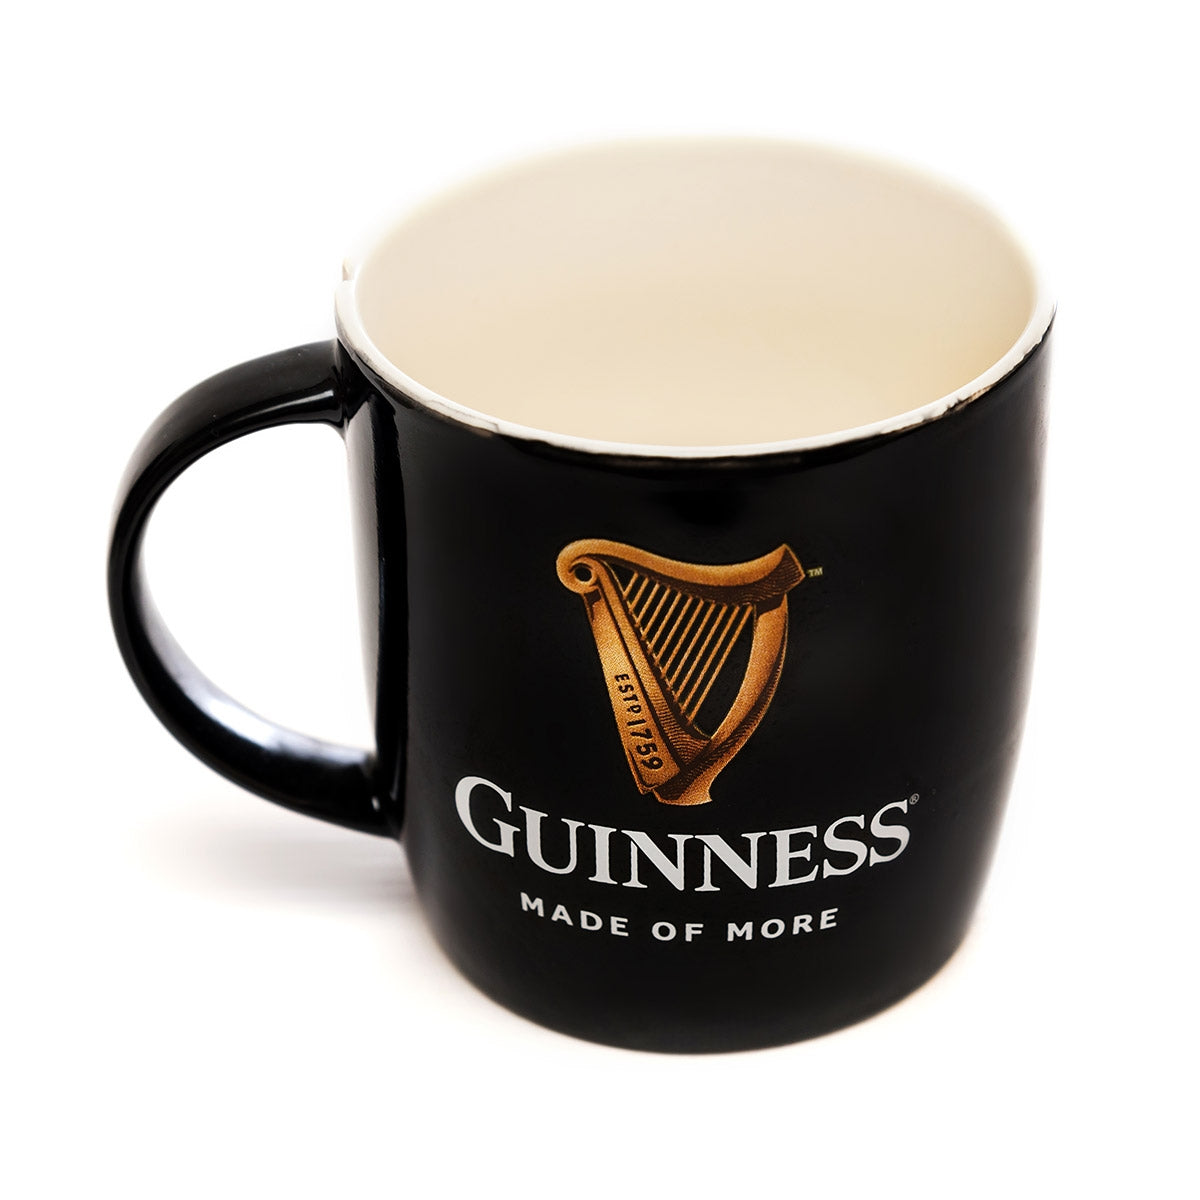 A Guinness Black Mug with Official Harp Logo is displayed on a white background.